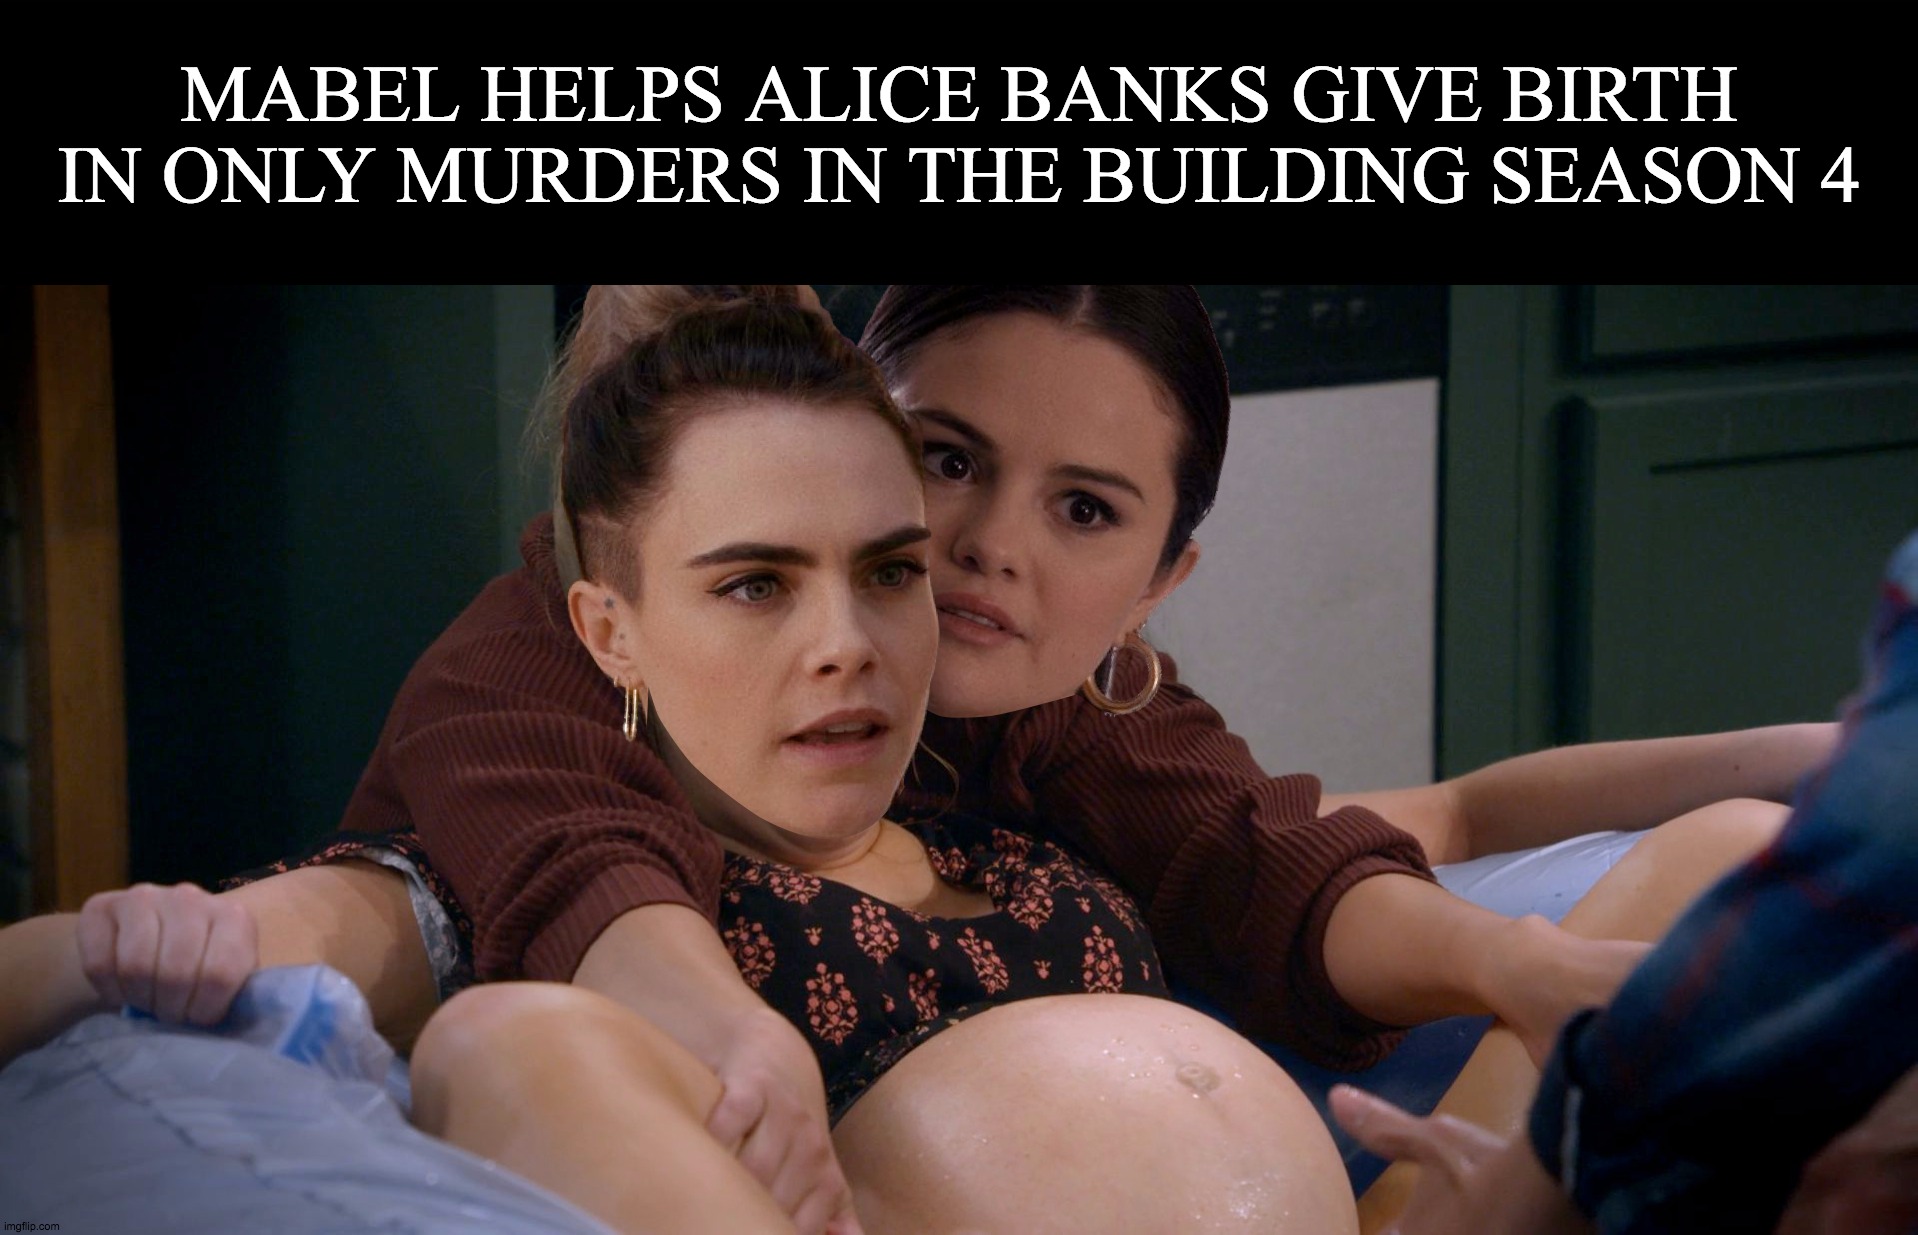 Alice Banks Giving Birth | MABEL HELPS ALICE BANKS GIVE BIRTH IN ONLY MURDERS IN THE BUILDING SEASON 4 | image tagged in alice banks giving birth | made w/ Imgflip meme maker